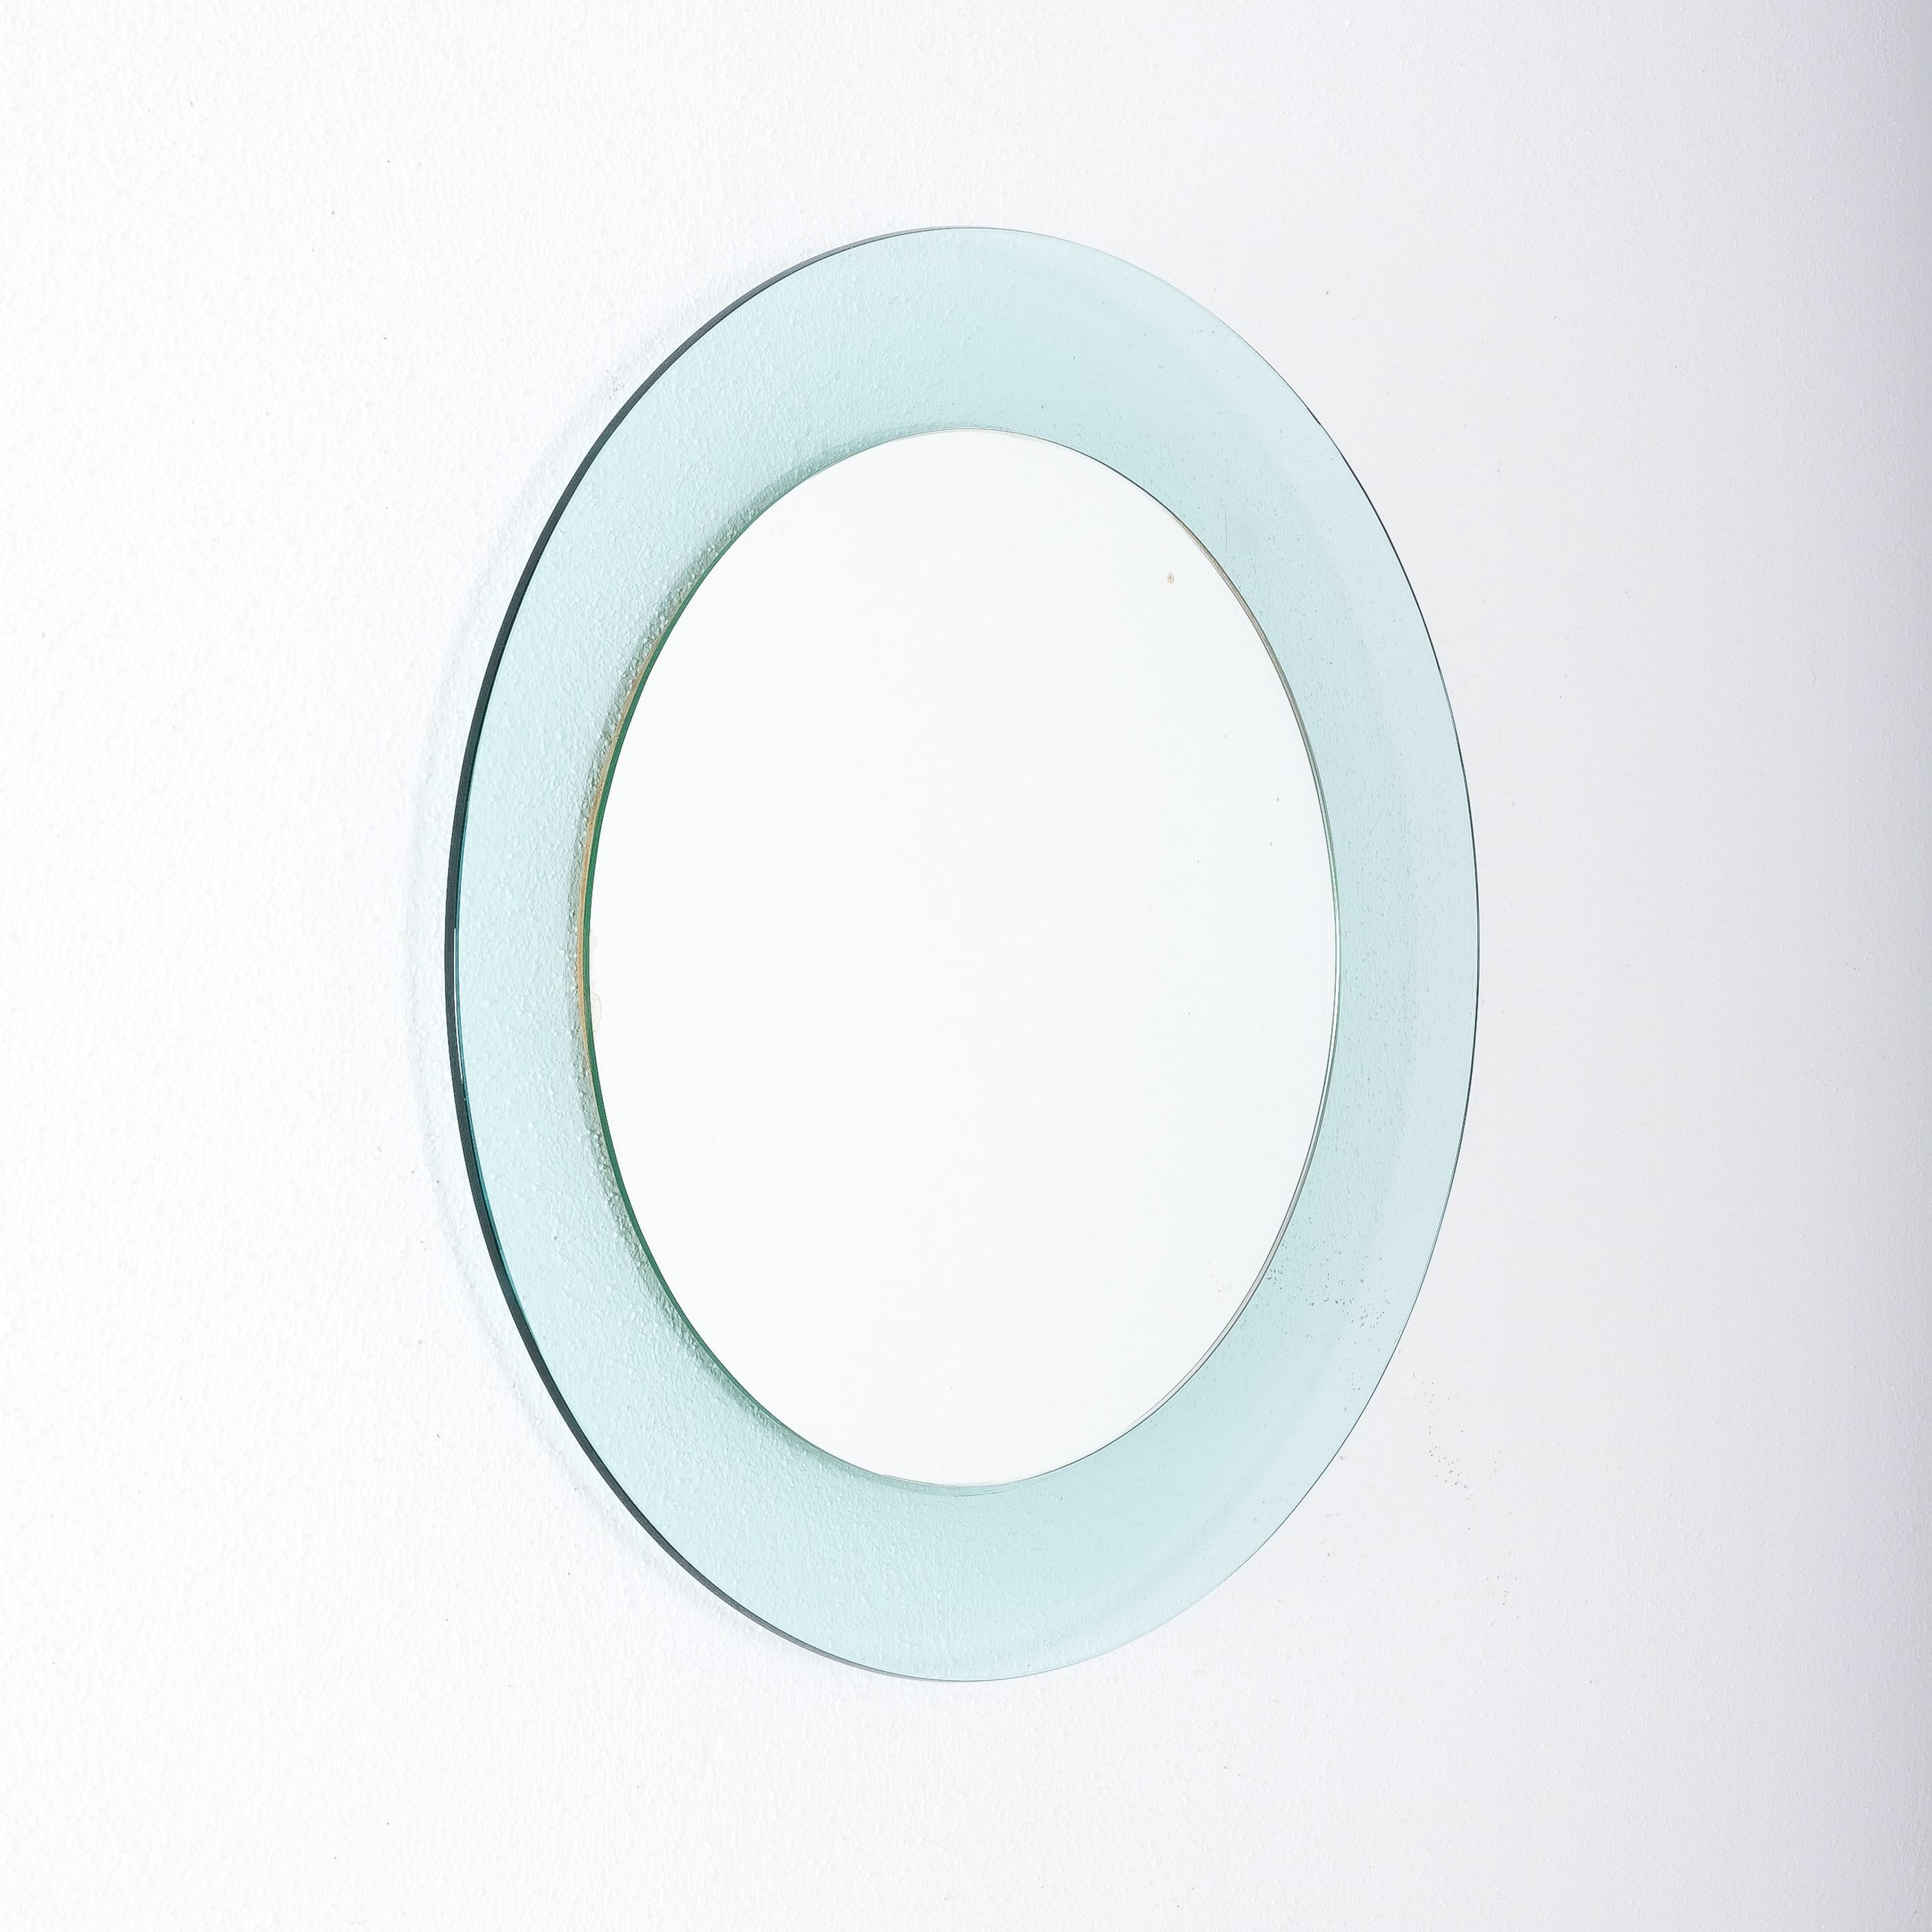 Mod. 1699 mirror by Max Ingrand, Fontana Arte, Italy.

Max Ingrand round blue mirror Fontana Arte Model 1699, Italy, circa 1968. Elegant light blue-turquoise curved and beveled glass framing mirrored glass. Good condition with no chips. One small